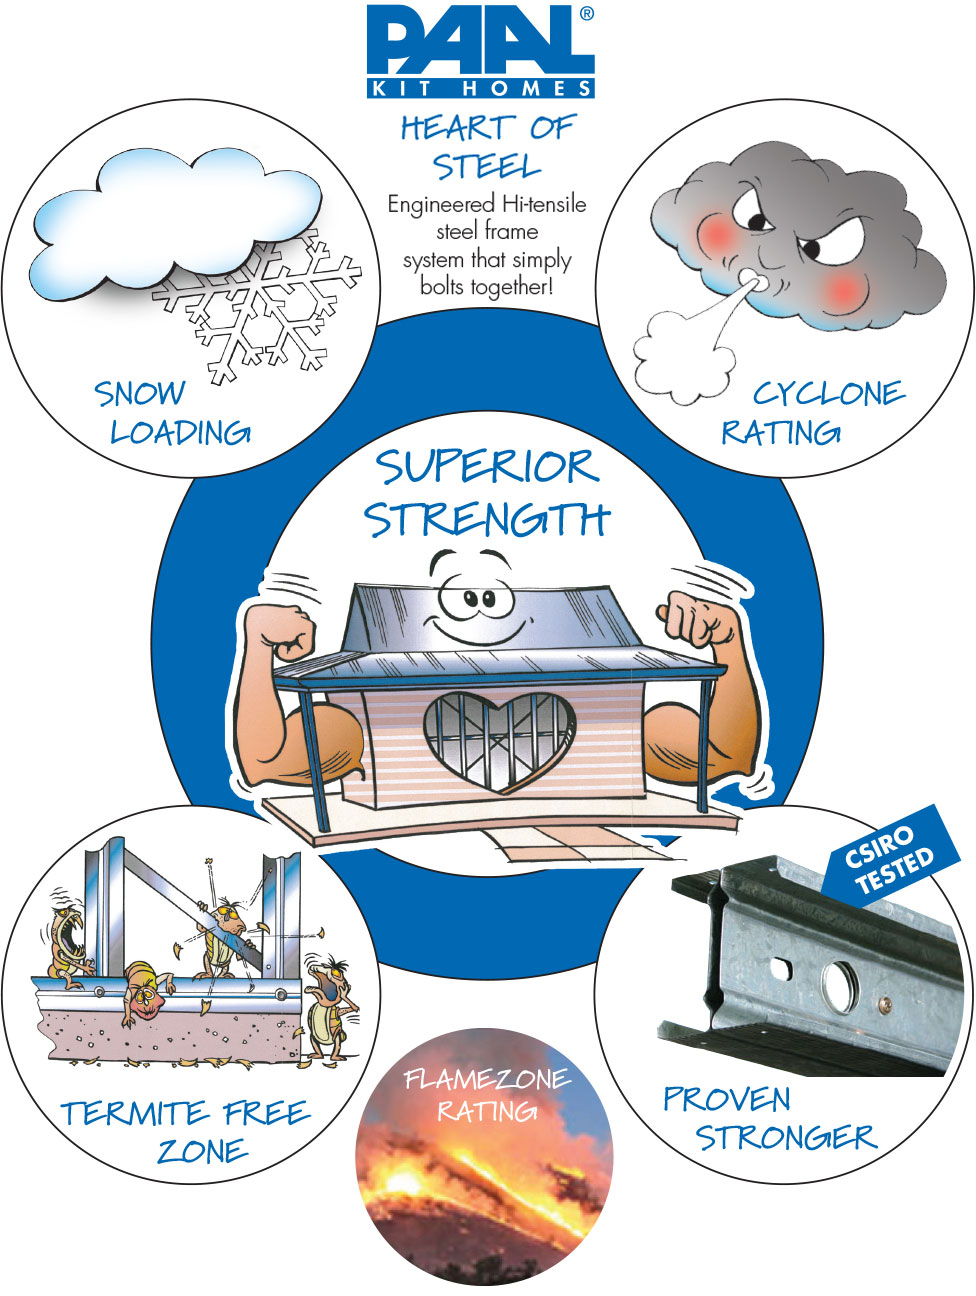 Infographic showing benefits of Paal steel frames.